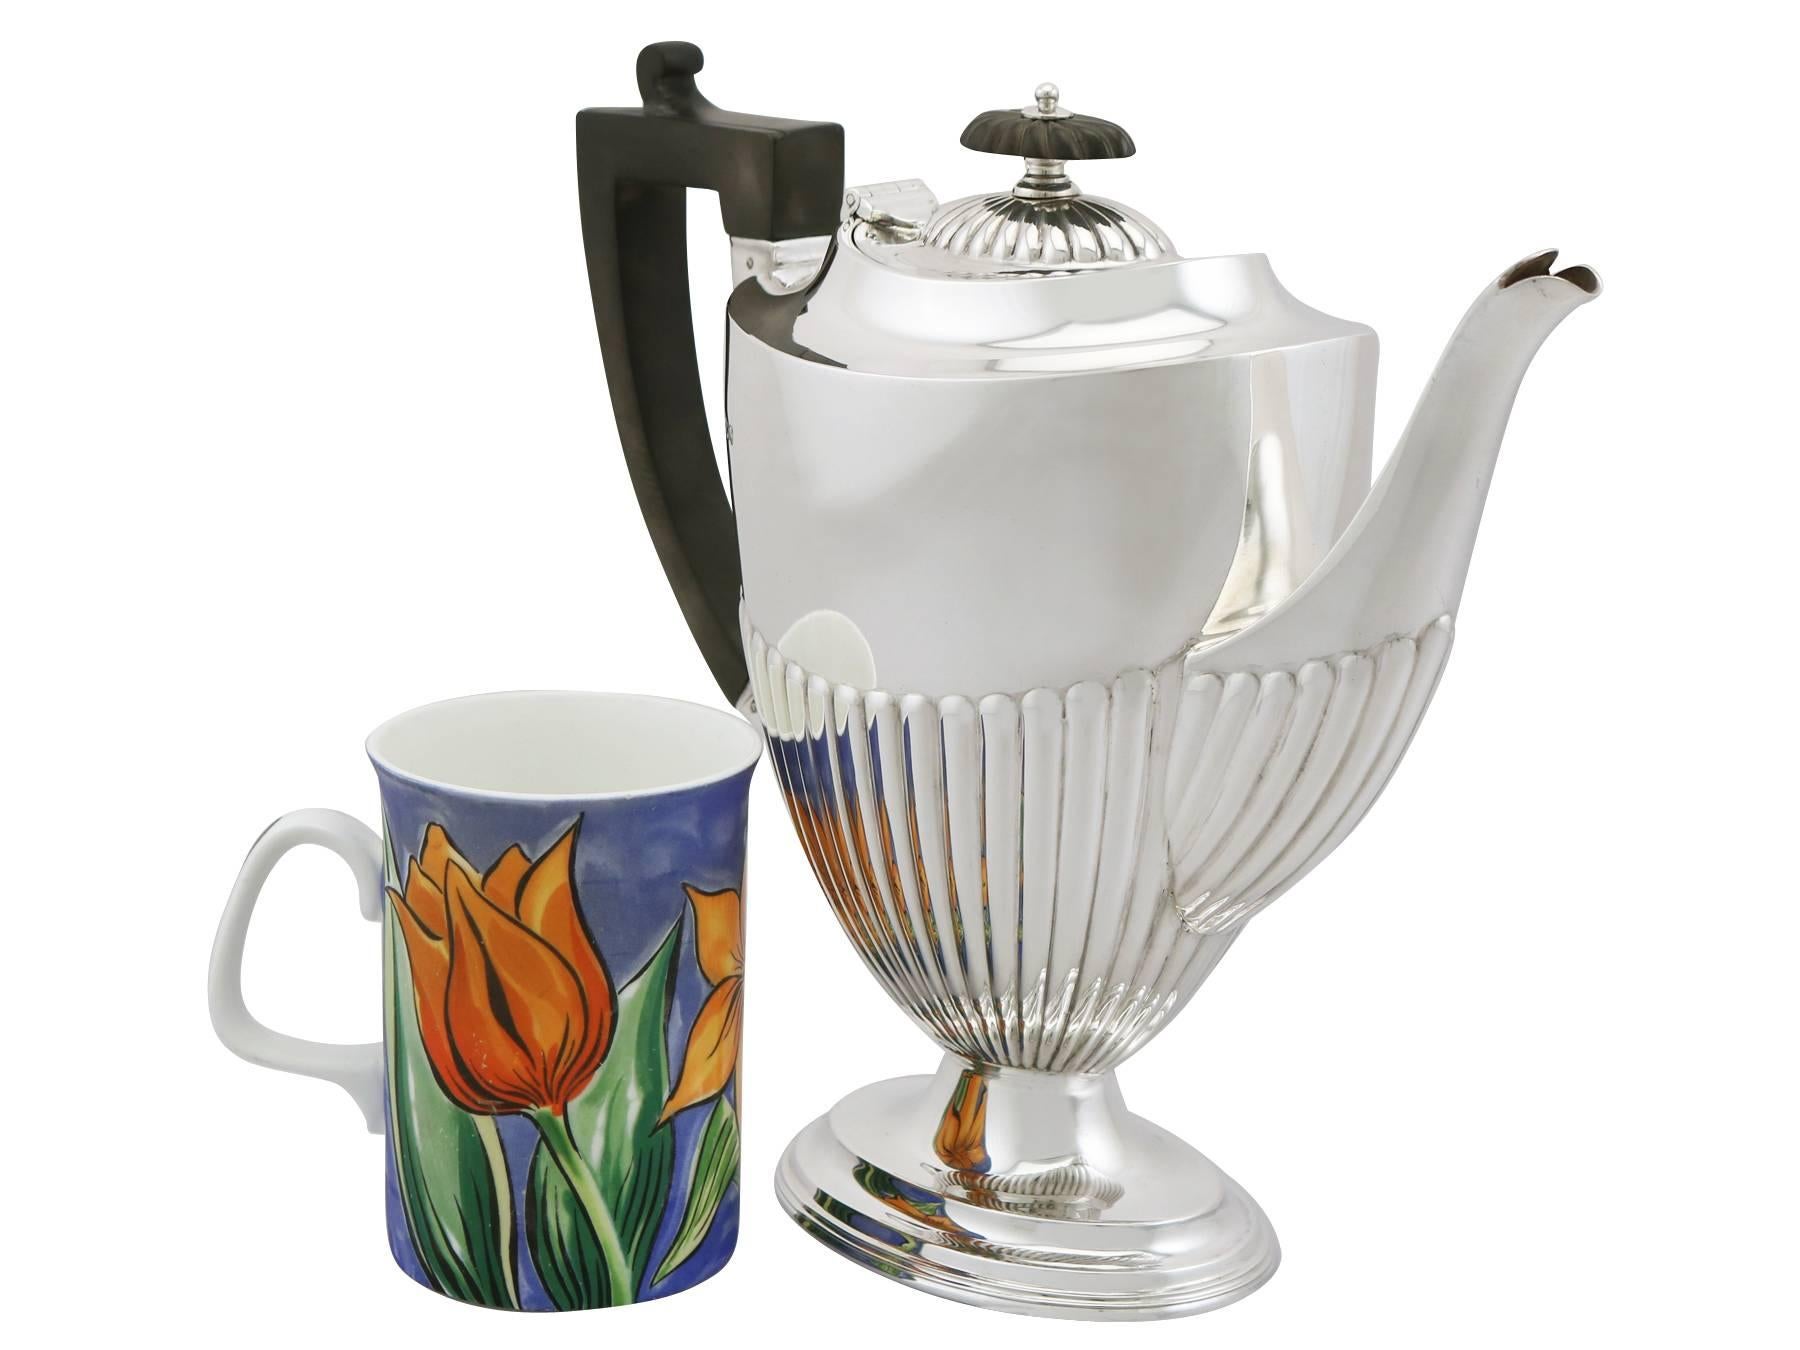 A fine and impressive antique George V English sterling silver coffee pot in the Queen Anne style; an addition to our silver teaware collection.

This fine antique George V sterling silver coffee pot has an oval form onto an oval pedestal foot in